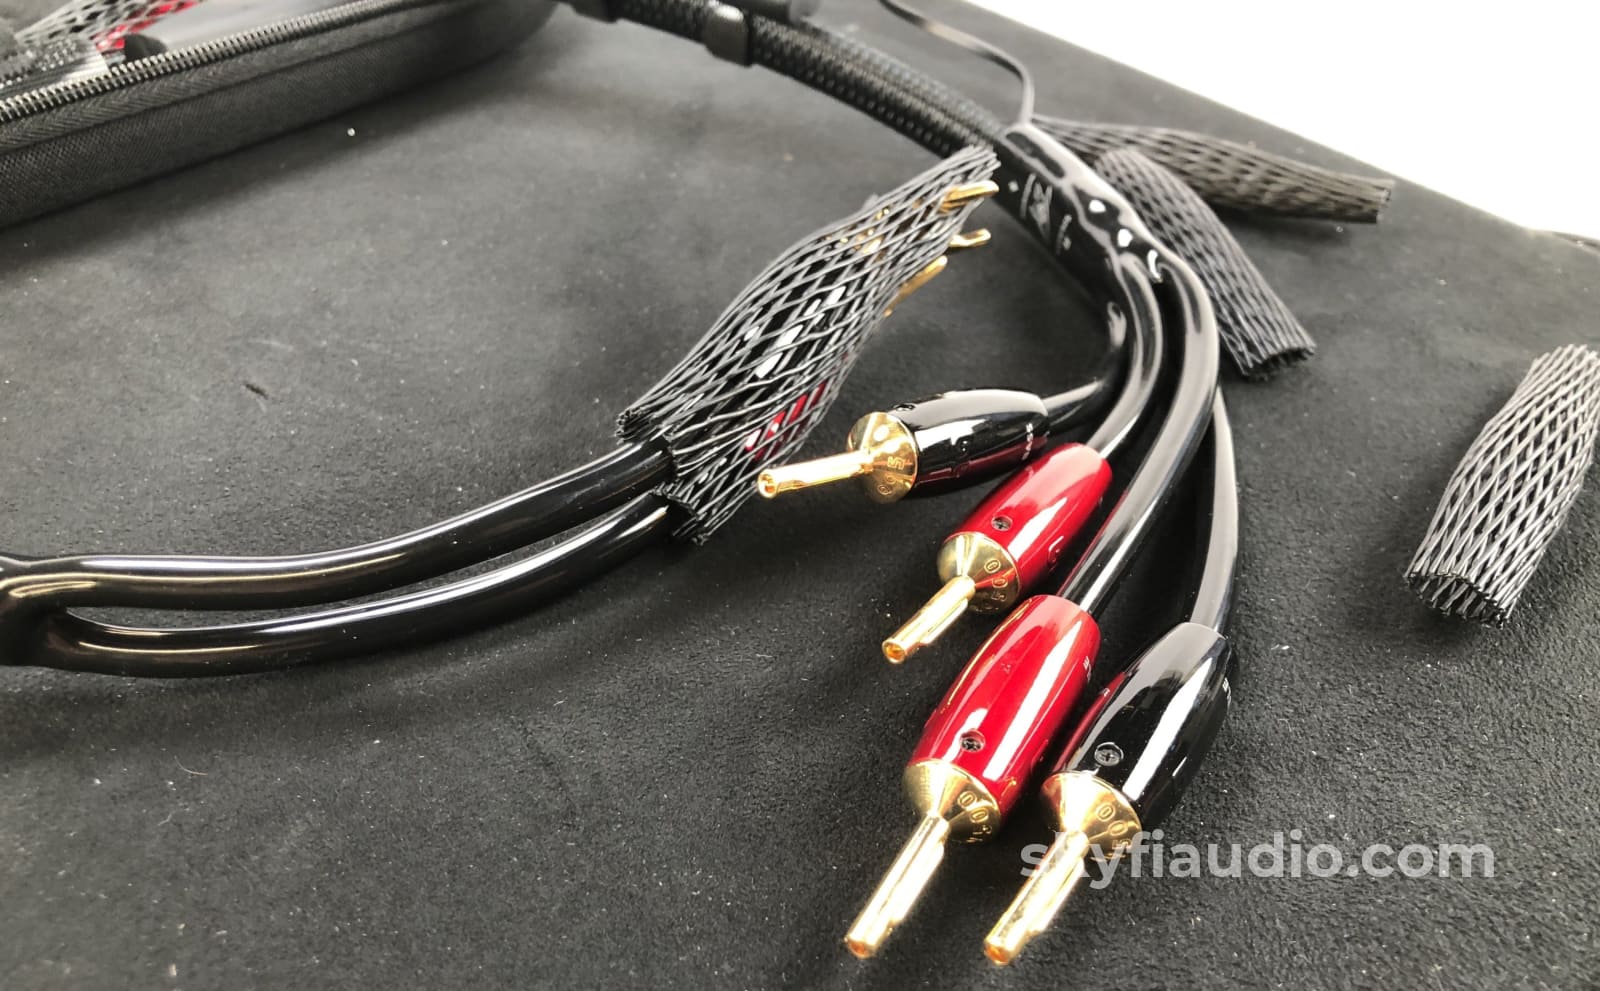 Audioquest Rocket 88 Bi-Wire Speaker Cables With 72V Dbs - 14